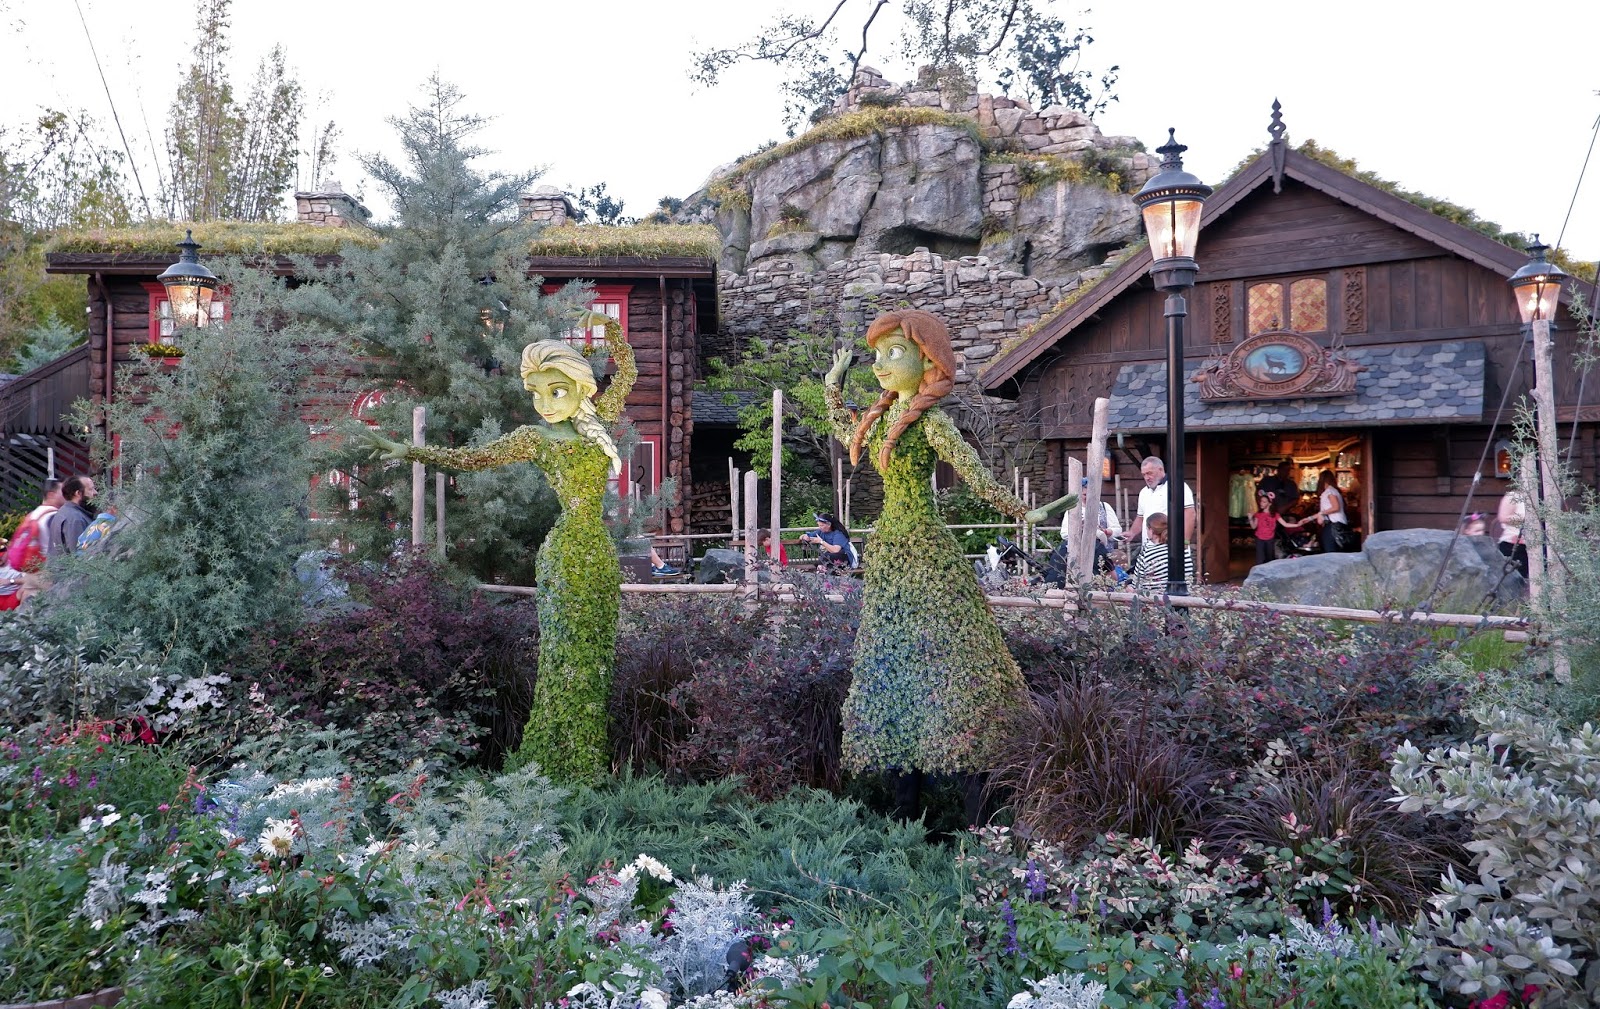 Elsa and Anna topiaries at the 2019 Epcot International Flower and Garden Festival